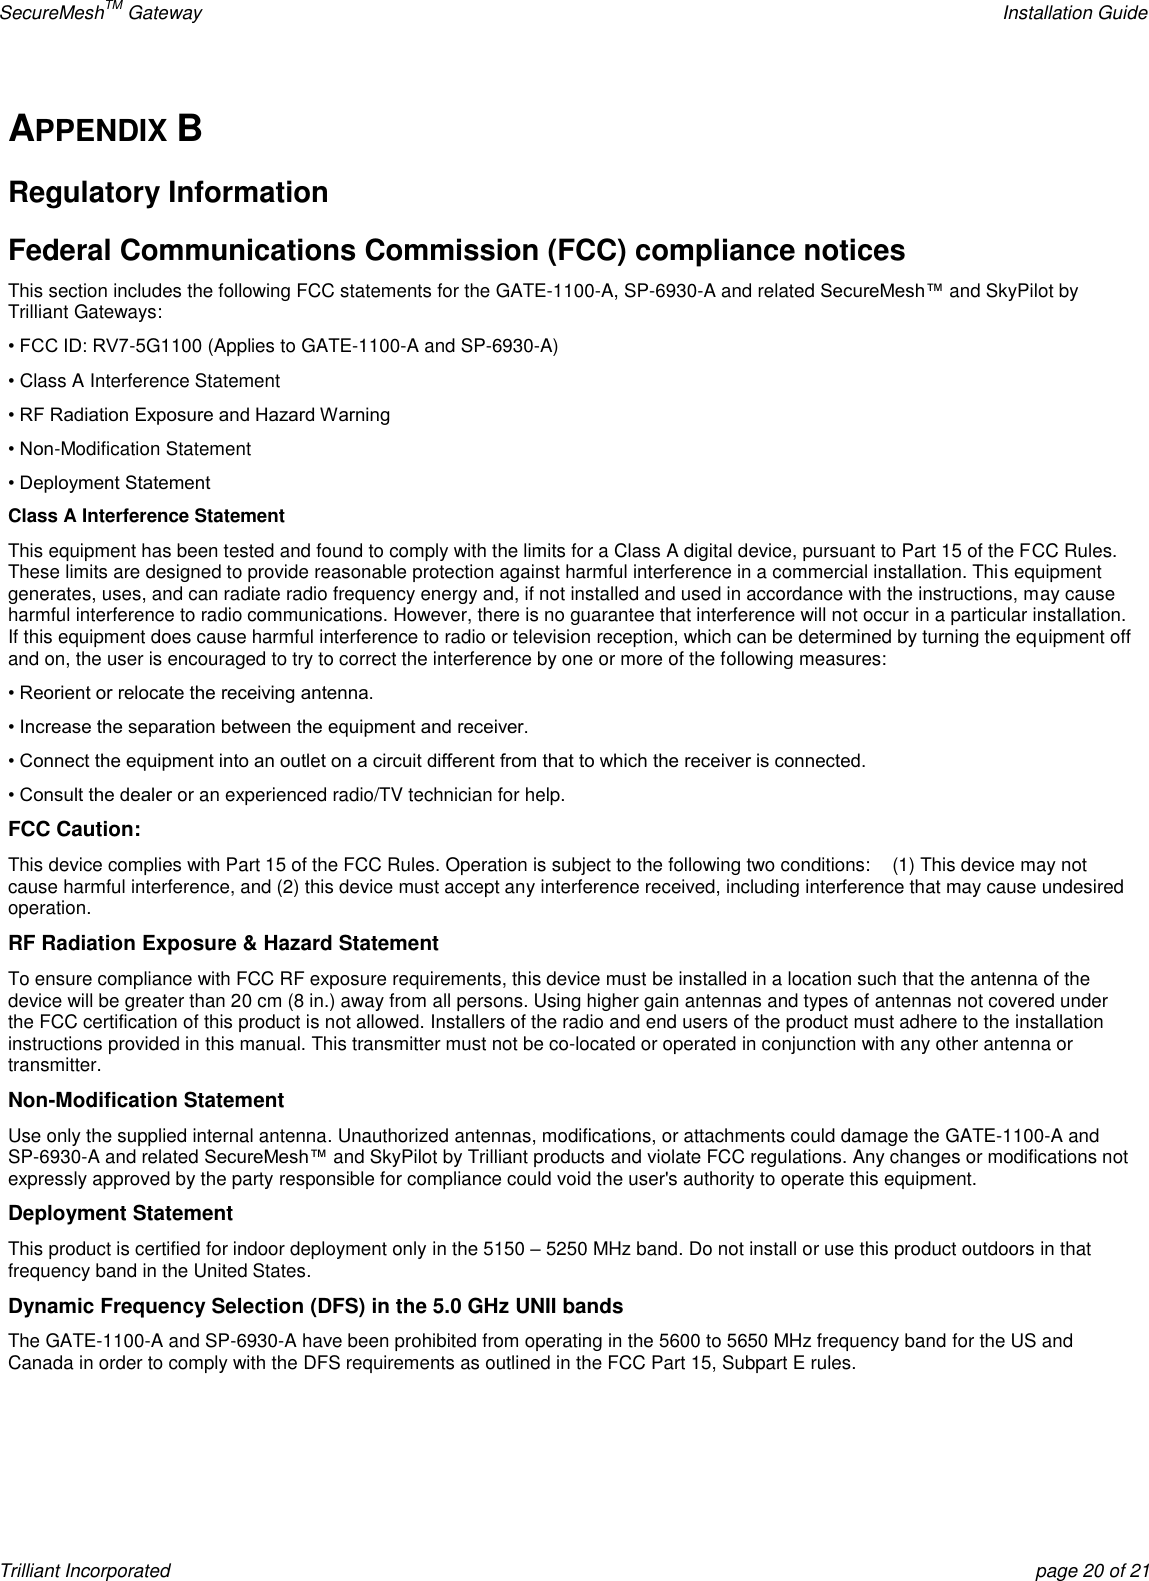 SecureMeshTM Gateway    Installation Guide Trilliant Incorporated  page 20 of 21 APPENDIX B Regulatory Information Federal Communications Commission (FCC) compliance notices This section includes the following FCC statements for the GATE-1100-A, SP-6930-A and related SecureMesh™ and SkyPilot by Trilliant Gateways: • FCC ID: RV7-5G1100 (Applies to GATE-1100-A and SP-6930-A) • Class A Interference Statement • RF Radiation Exposure and Hazard Warning • Non-Modification Statement • Deployment Statement Class A Interference Statement This equipment has been tested and found to comply with the limits for a Class A digital device, pursuant to Part 15 of the FCC Rules. These limits are designed to provide reasonable protection against harmful interference in a commercial installation. This equipment generates, uses, and can radiate radio frequency energy and, if not installed and used in accordance with the instructions, may cause harmful interference to radio communications. However, there is no guarantee that interference will not occur in a particular installation. If this equipment does cause harmful interference to radio or television reception, which can be determined by turning the equipment off and on, the user is encouraged to try to correct the interference by one or more of the following measures: • Reorient or relocate the receiving antenna. • Increase the separation between the equipment and receiver. • Connect the equipment into an outlet on a circuit different from that to which the receiver is connected. • Consult the dealer or an experienced radio/TV technician for help. FCC Caution: This device complies with Part 15 of the FCC Rules. Operation is subject to the following two conditions:    (1) This device may not cause harmful interference, and (2) this device must accept any interference received, including interference that may cause undesired operation. RF Radiation Exposure &amp; Hazard Statement To ensure compliance with FCC RF exposure requirements, this device must be installed in a location such that the antenna of the device will be greater than 20 cm (8 in.) away from all persons. Using higher gain antennas and types of antennas not covered under the FCC certification of this product is not allowed. Installers of the radio and end users of the product must adhere to the installation instructions provided in this manual. This transmitter must not be co-located or operated in conjunction with any other antenna or transmitter. Non-Modification Statement Use only the supplied internal antenna. Unauthorized antennas, modifications, or attachments could damage the GATE-1100-A and SP-6930-A and related SecureMesh™ and SkyPilot by Trilliant products and violate FCC regulations. Any changes or modifications not expressly approved by the party responsible for compliance could void the user&apos;s authority to operate this equipment. Deployment Statement This product is certified for indoor deployment only in the 5150 – 5250 MHz band. Do not install or use this product outdoors in that frequency band in the United States. Dynamic Frequency Selection (DFS) in the 5.0 GHz UNII bands The GATE-1100-A and SP-6930-A have been prohibited from operating in the 5600 to 5650 MHz frequency band for the US and Canada in order to comply with the DFS requirements as outlined in the FCC Part 15, Subpart E rules.    